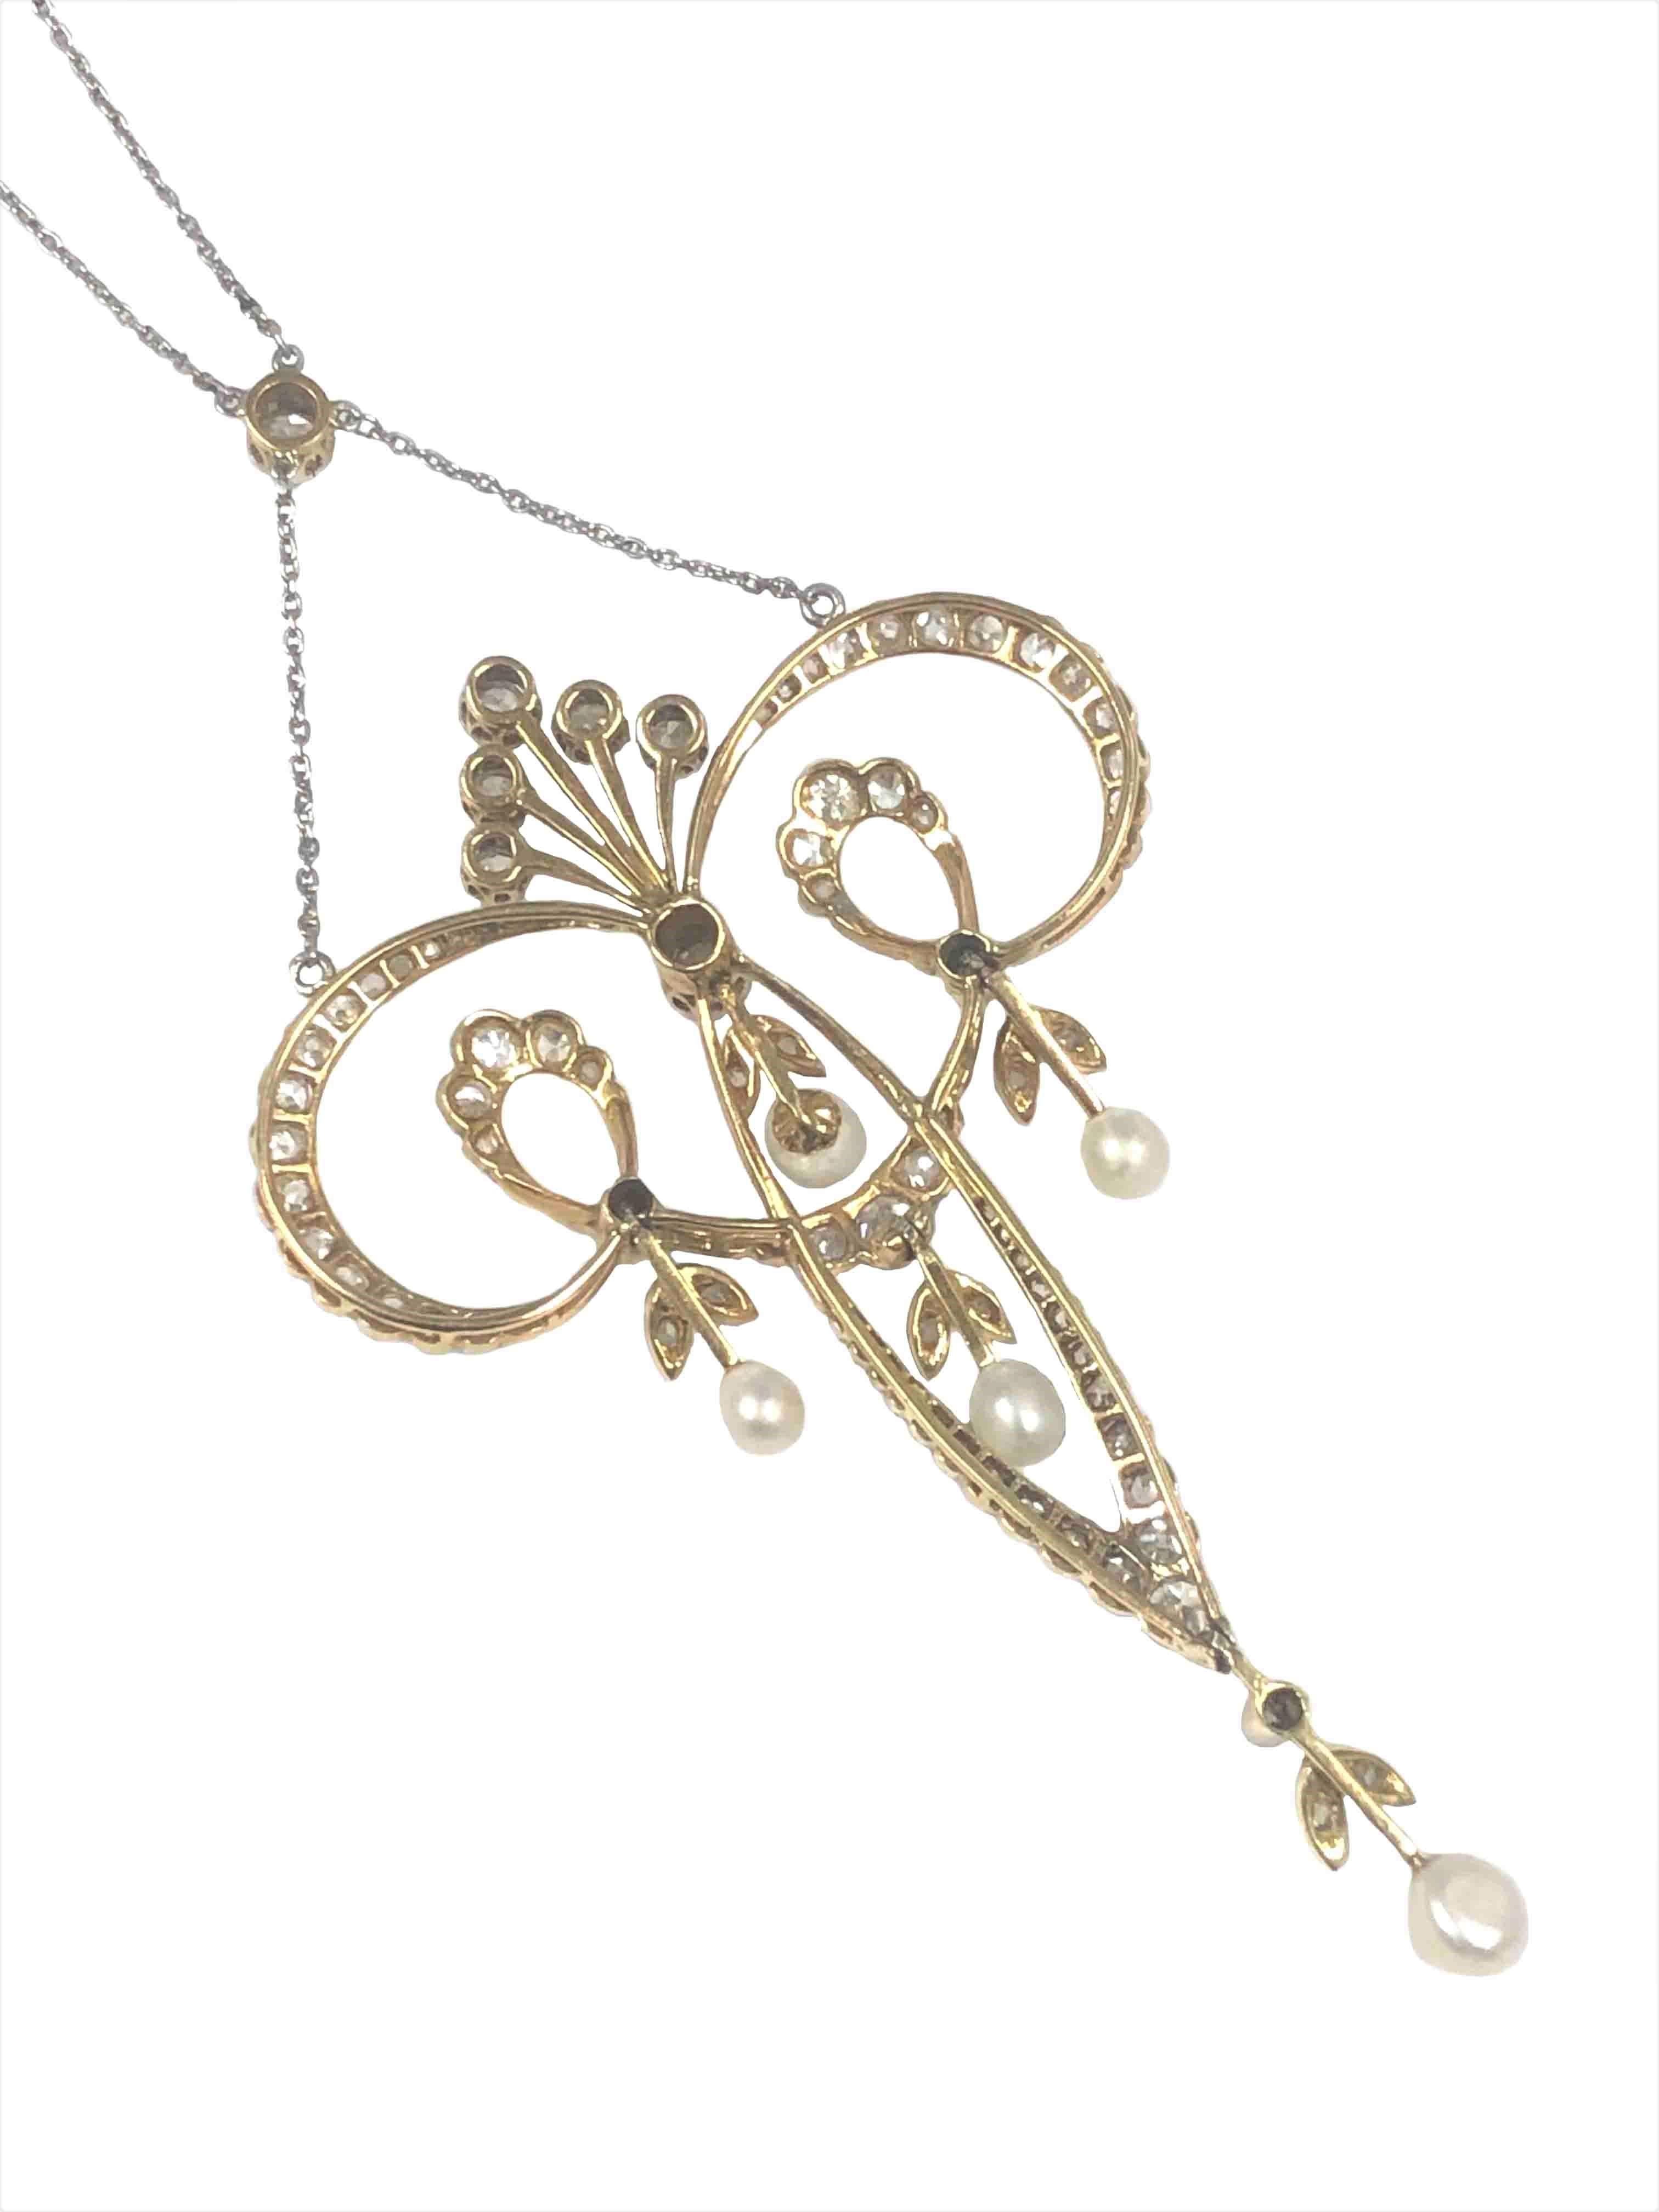 Circa 1910 Art Nouveau Platinum top and Yellow Gold backed Necklace, measuring 3 inches in length X 1 3/4 inches wide and suspended from a 17 inch chain. Set with European, Mine and Rose cut Diamonds totaling 2 Carats and further set with Natural